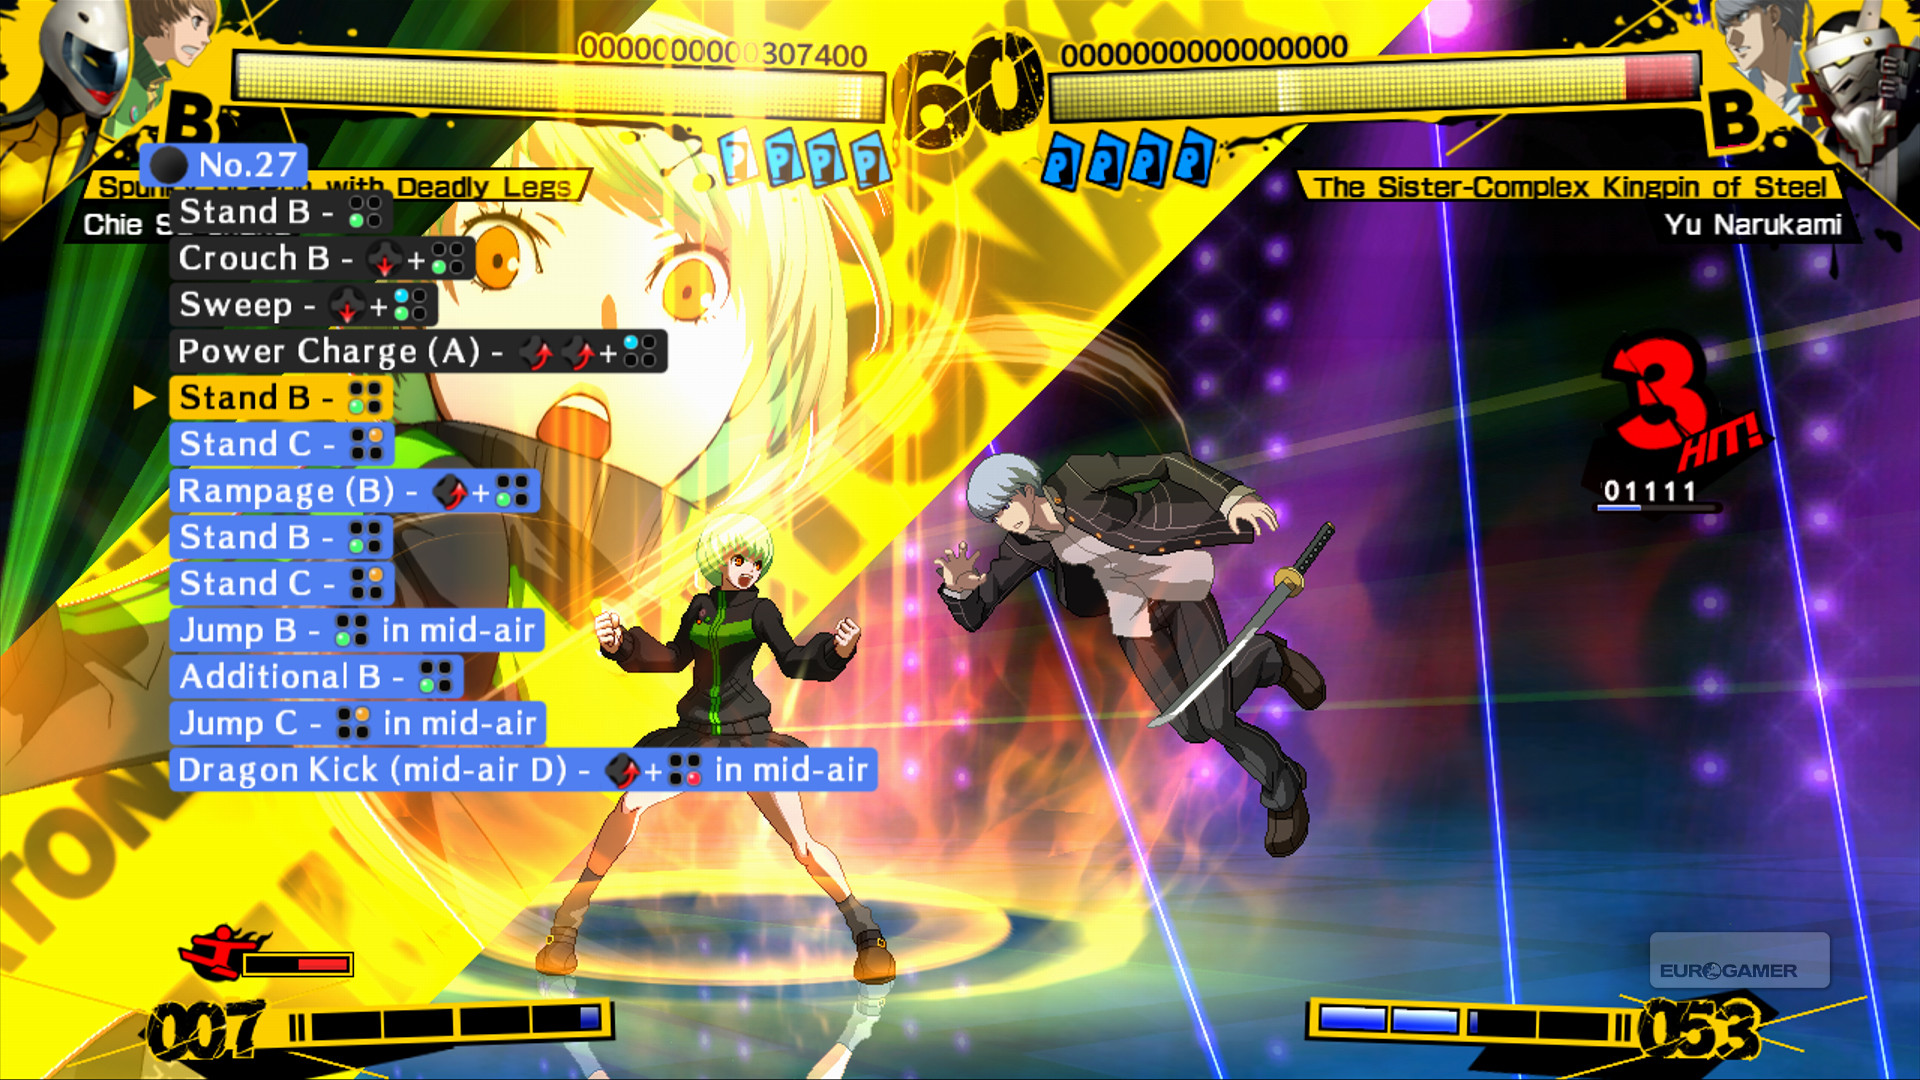 1920x1080 Persona 4 The Golden video game wallpapers Wallpaper 25 of 31 